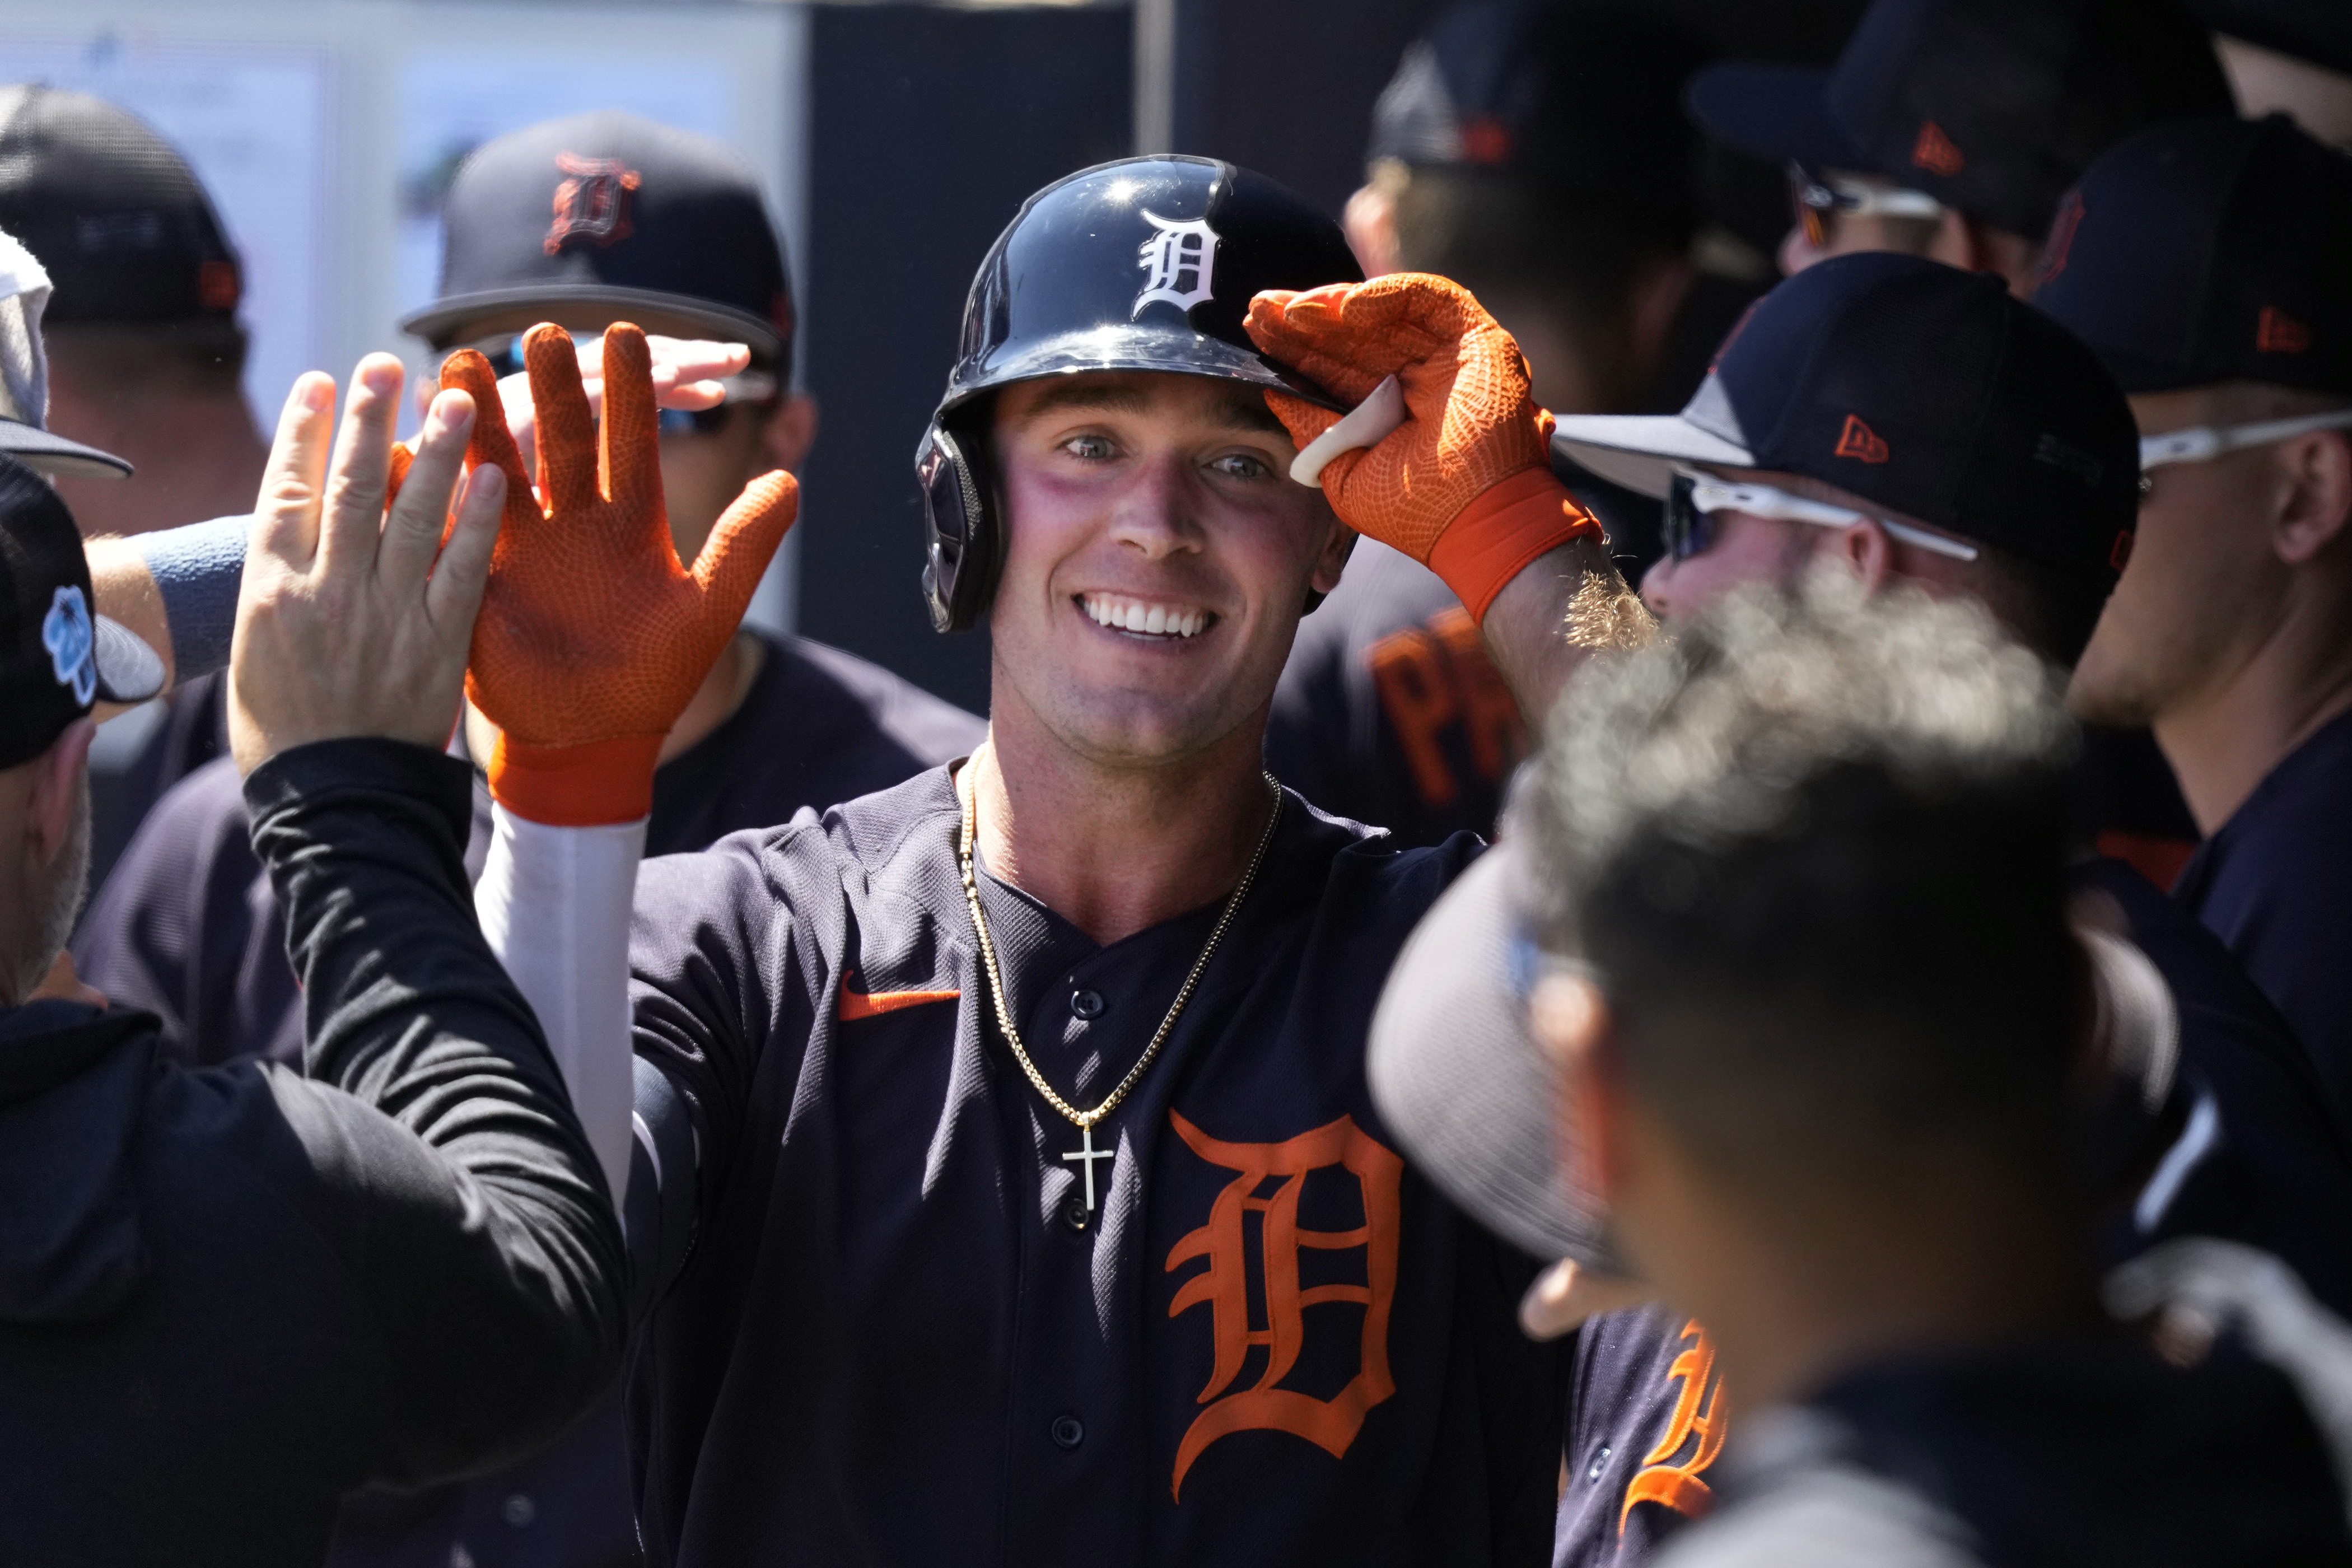 Detroit Tigers outfielder Kerry Carpenter exits game early with injury